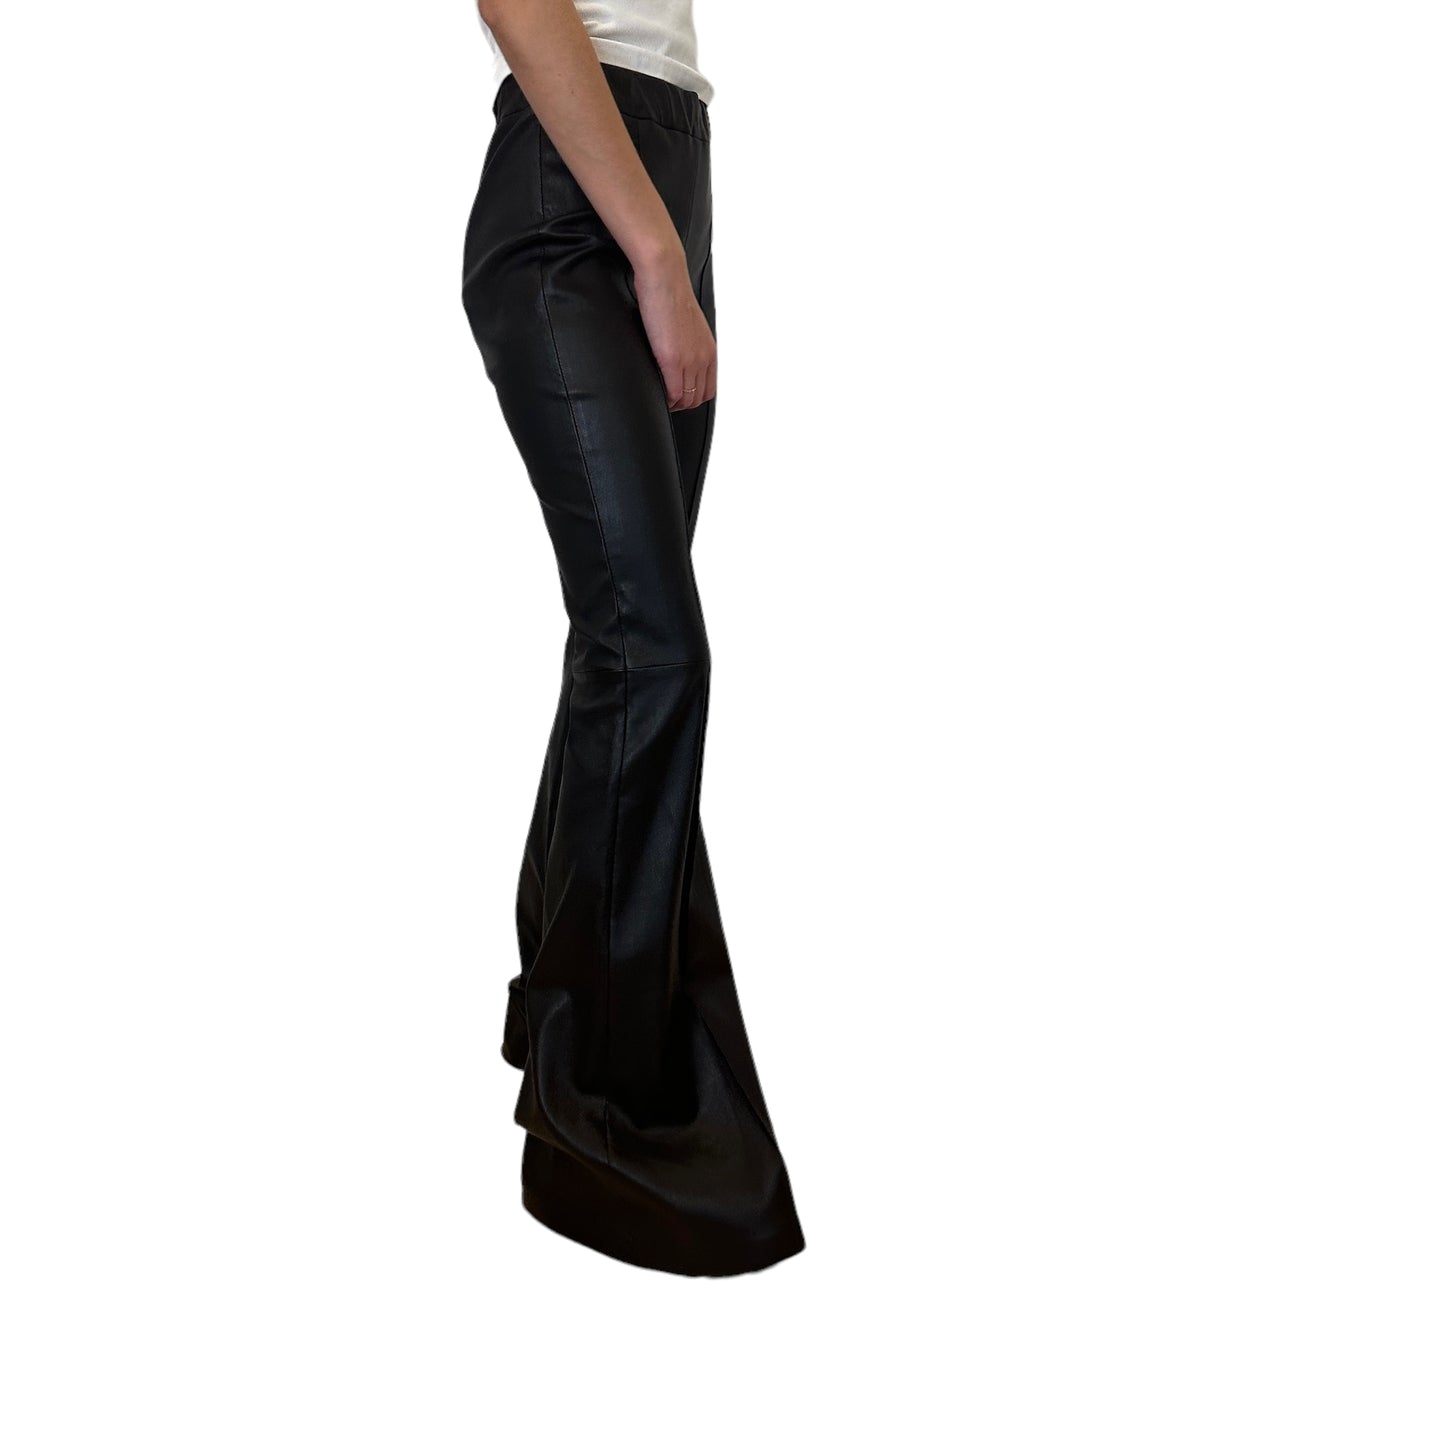 Black Leather Flared Pants - 4